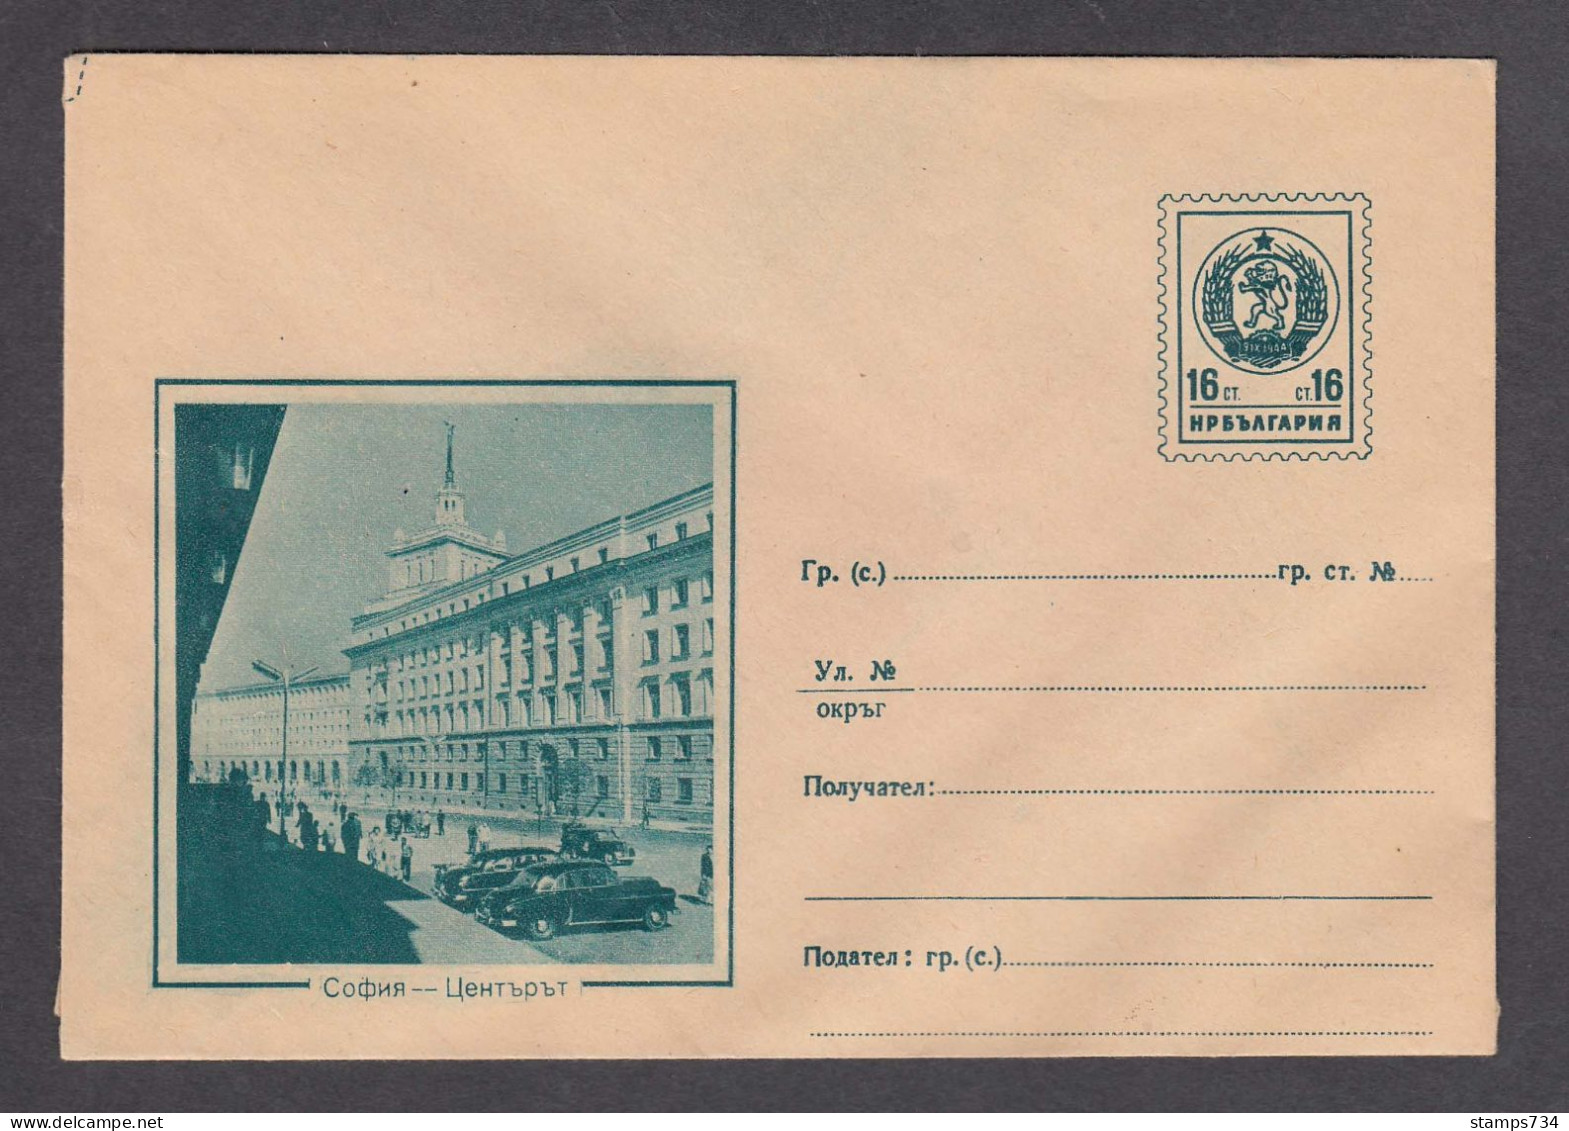 PS 236/1960 - Mint, Sofia - The Center, Autos. Post. Stationery - Bulgaria - Covers